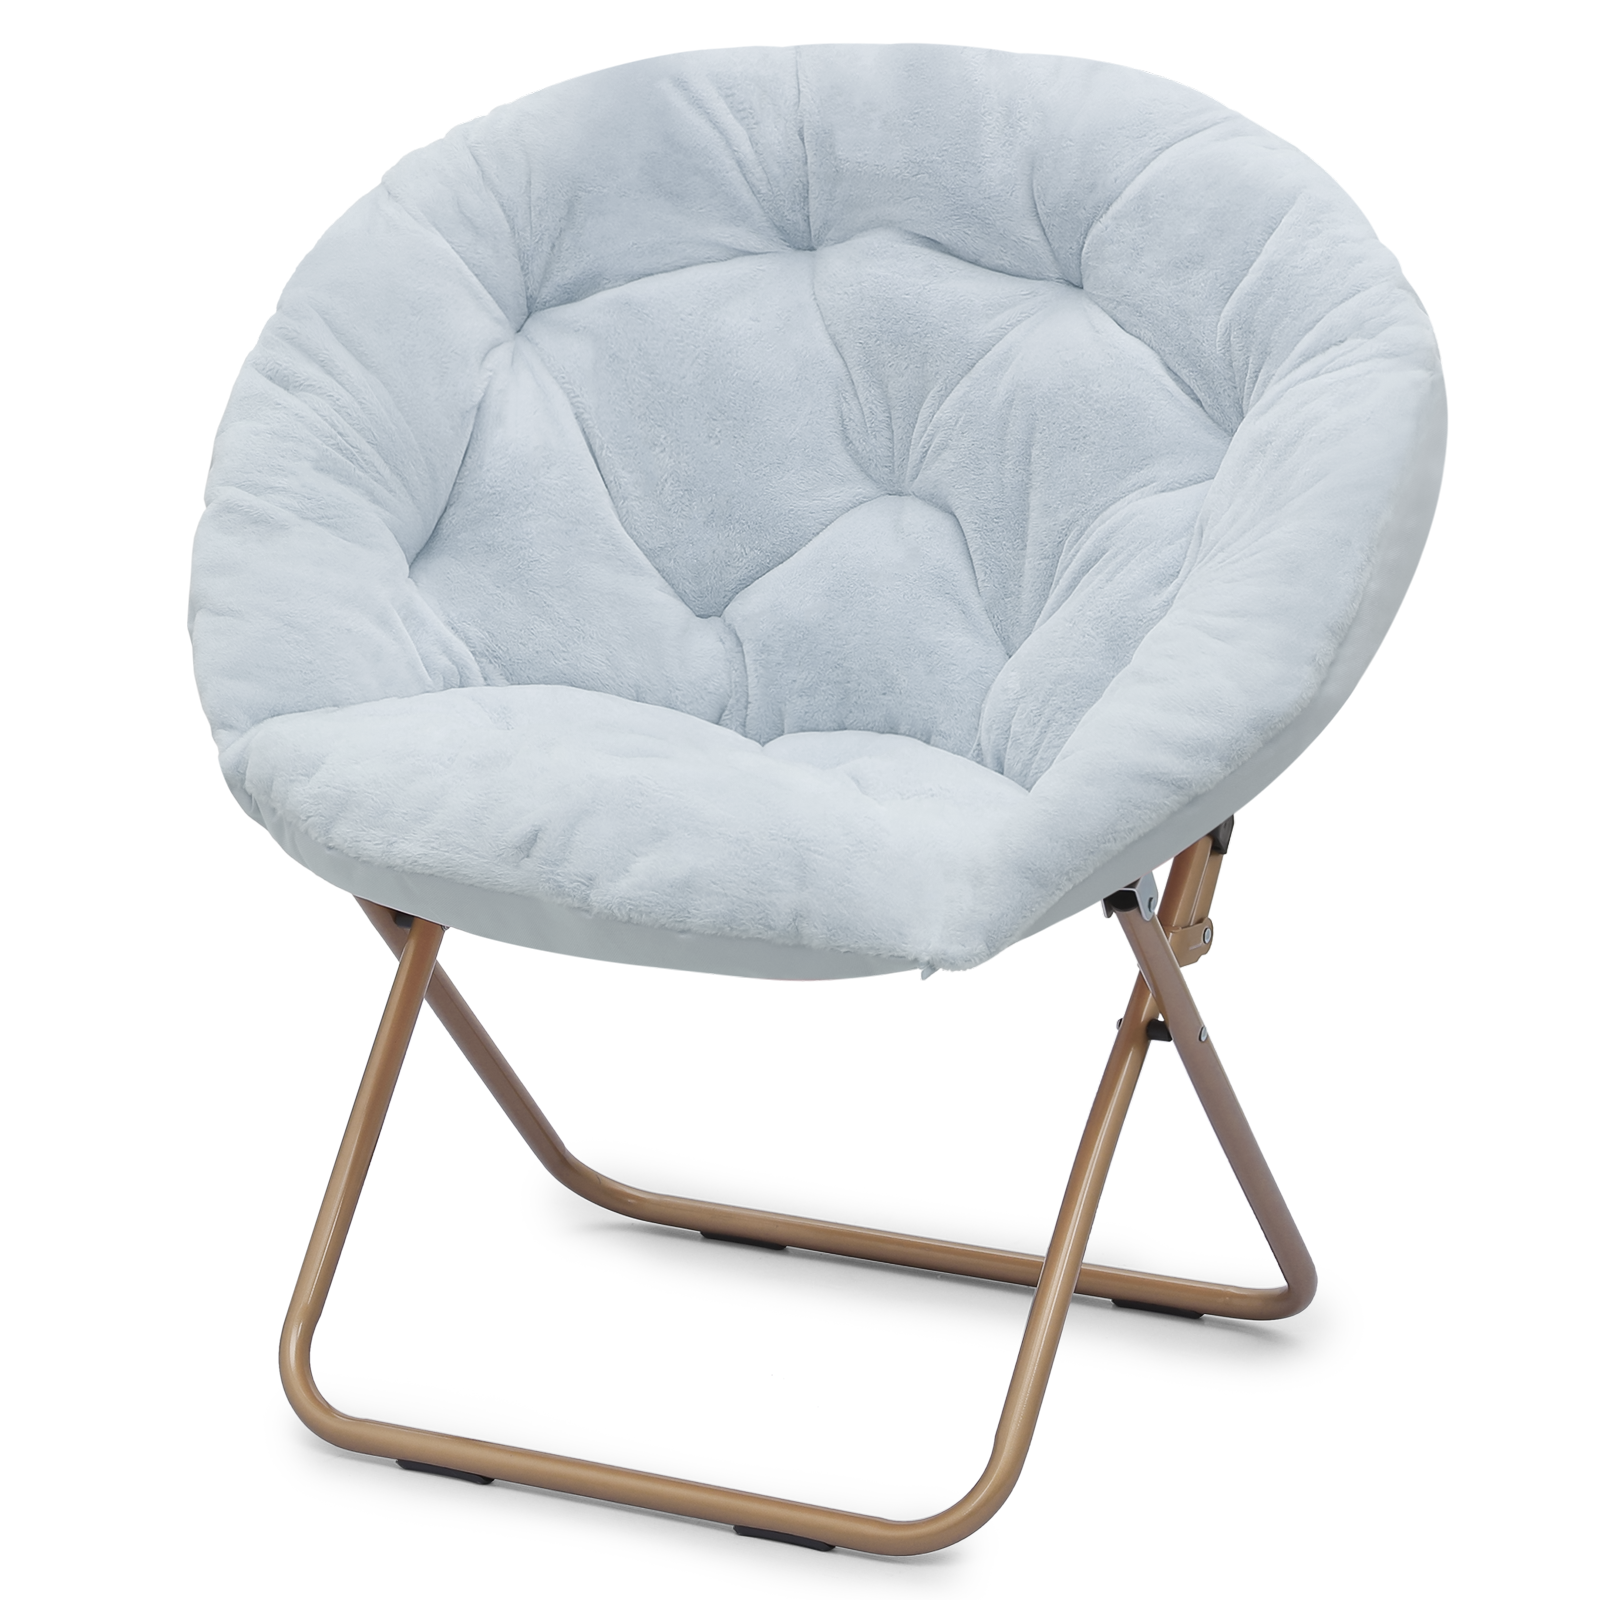 Magshion Folding Saucer Chair with Faux Fur Upholstery, Lounge Cozy Chair Moon Chair with Gold Metal Frame for Dorm Bedroom Living Room, Blue - image 1 of 10